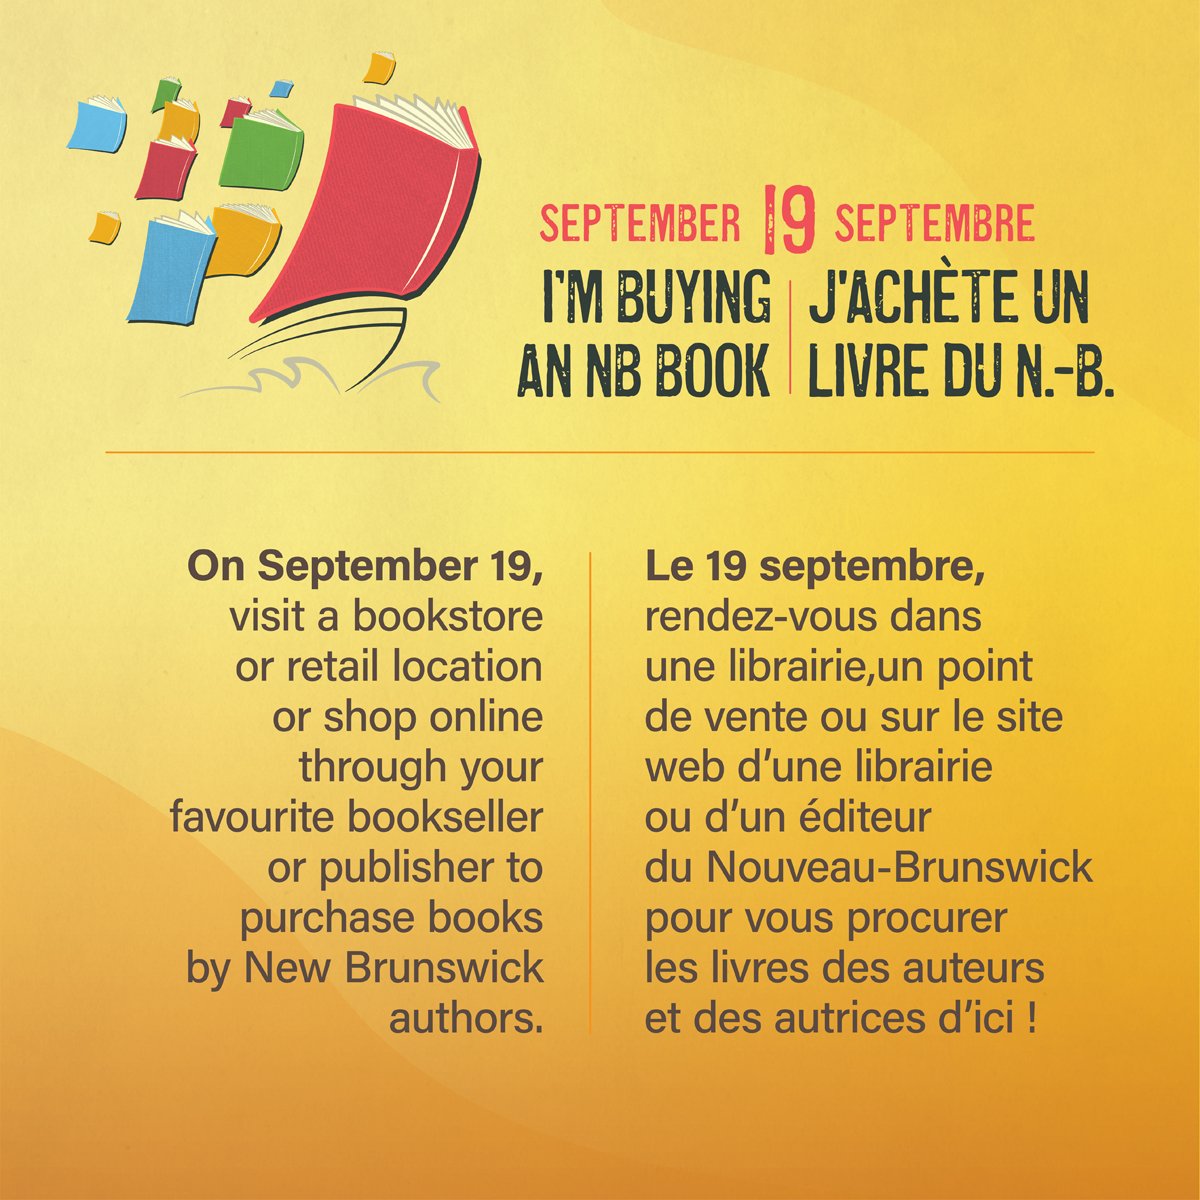 It's officially 'I'm buying an NB book! day'! 
Today, go to a bookstore or shop online & discover new favourites by our talented NB authors! You won't be disappointed!
RT & Share!
#19septembre #monlivreNB #jelislocal #September19 #myNBbook #IReadLocal
facebook.com/events/6849609…